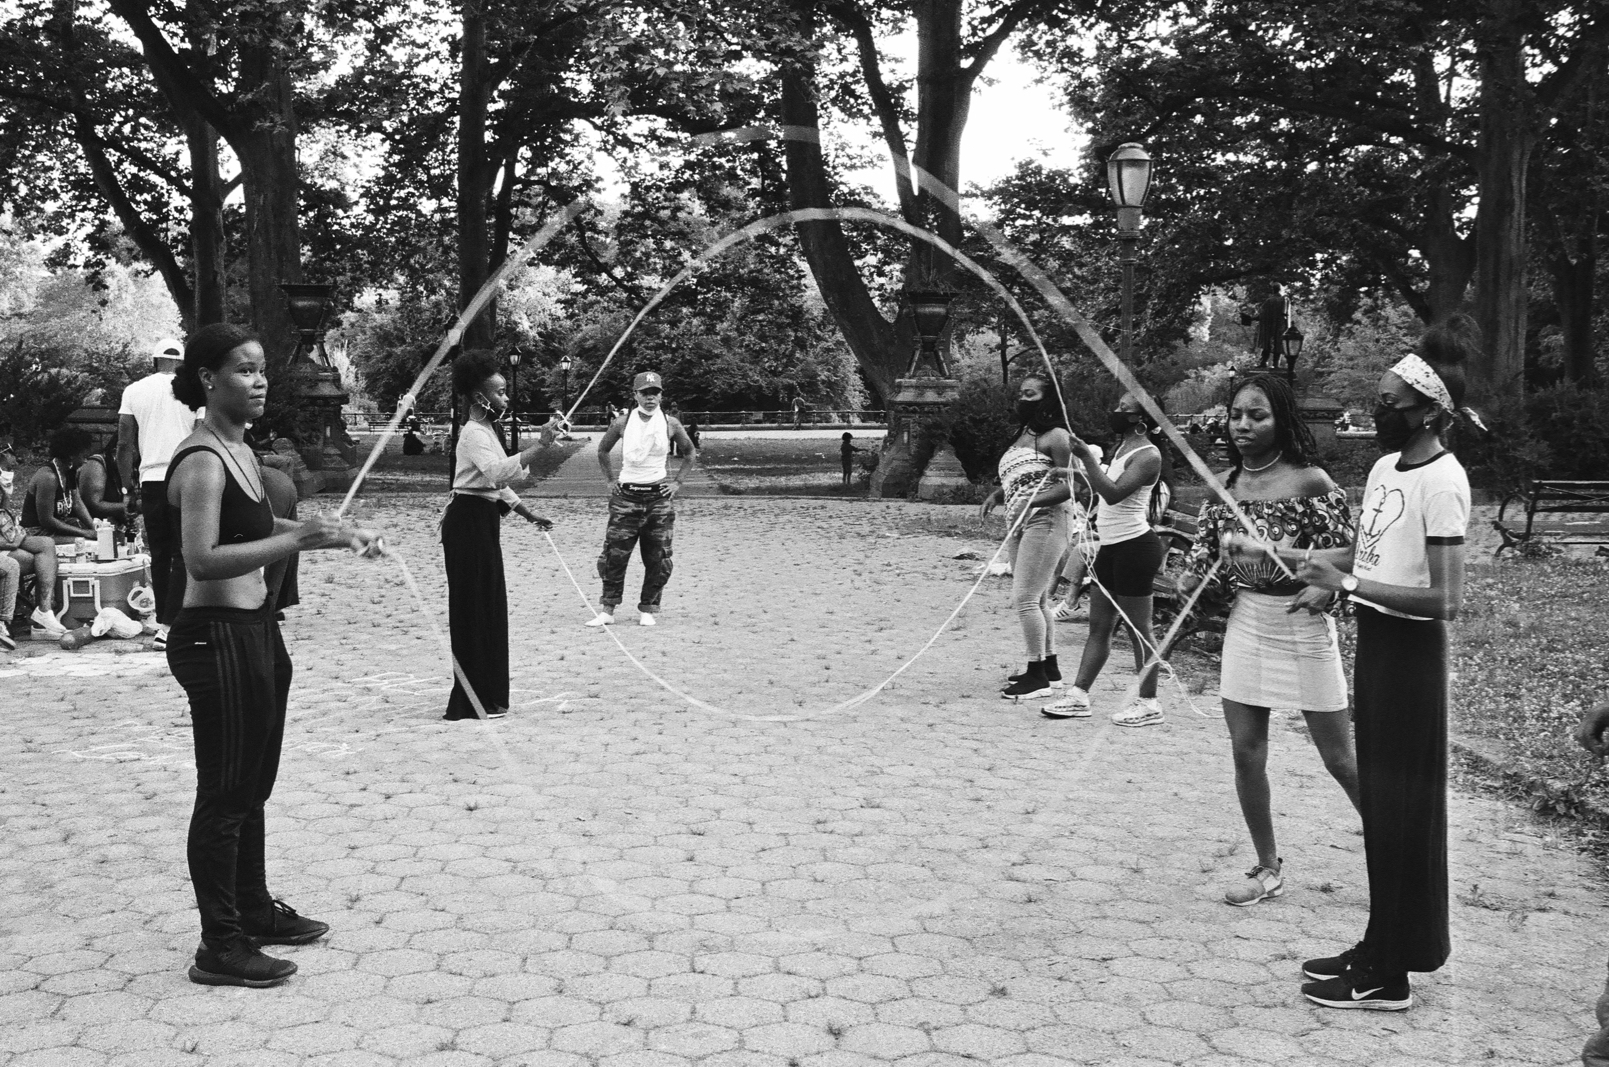 In this black and white photograph, the camera looks down the center of two sets of double-dutch jump rope, held by young Black women, some wearing face-masks in light of the coronavirus pandemic. Two of the women, standing on the right of the photograph, look ready to jump into each set of ropes.